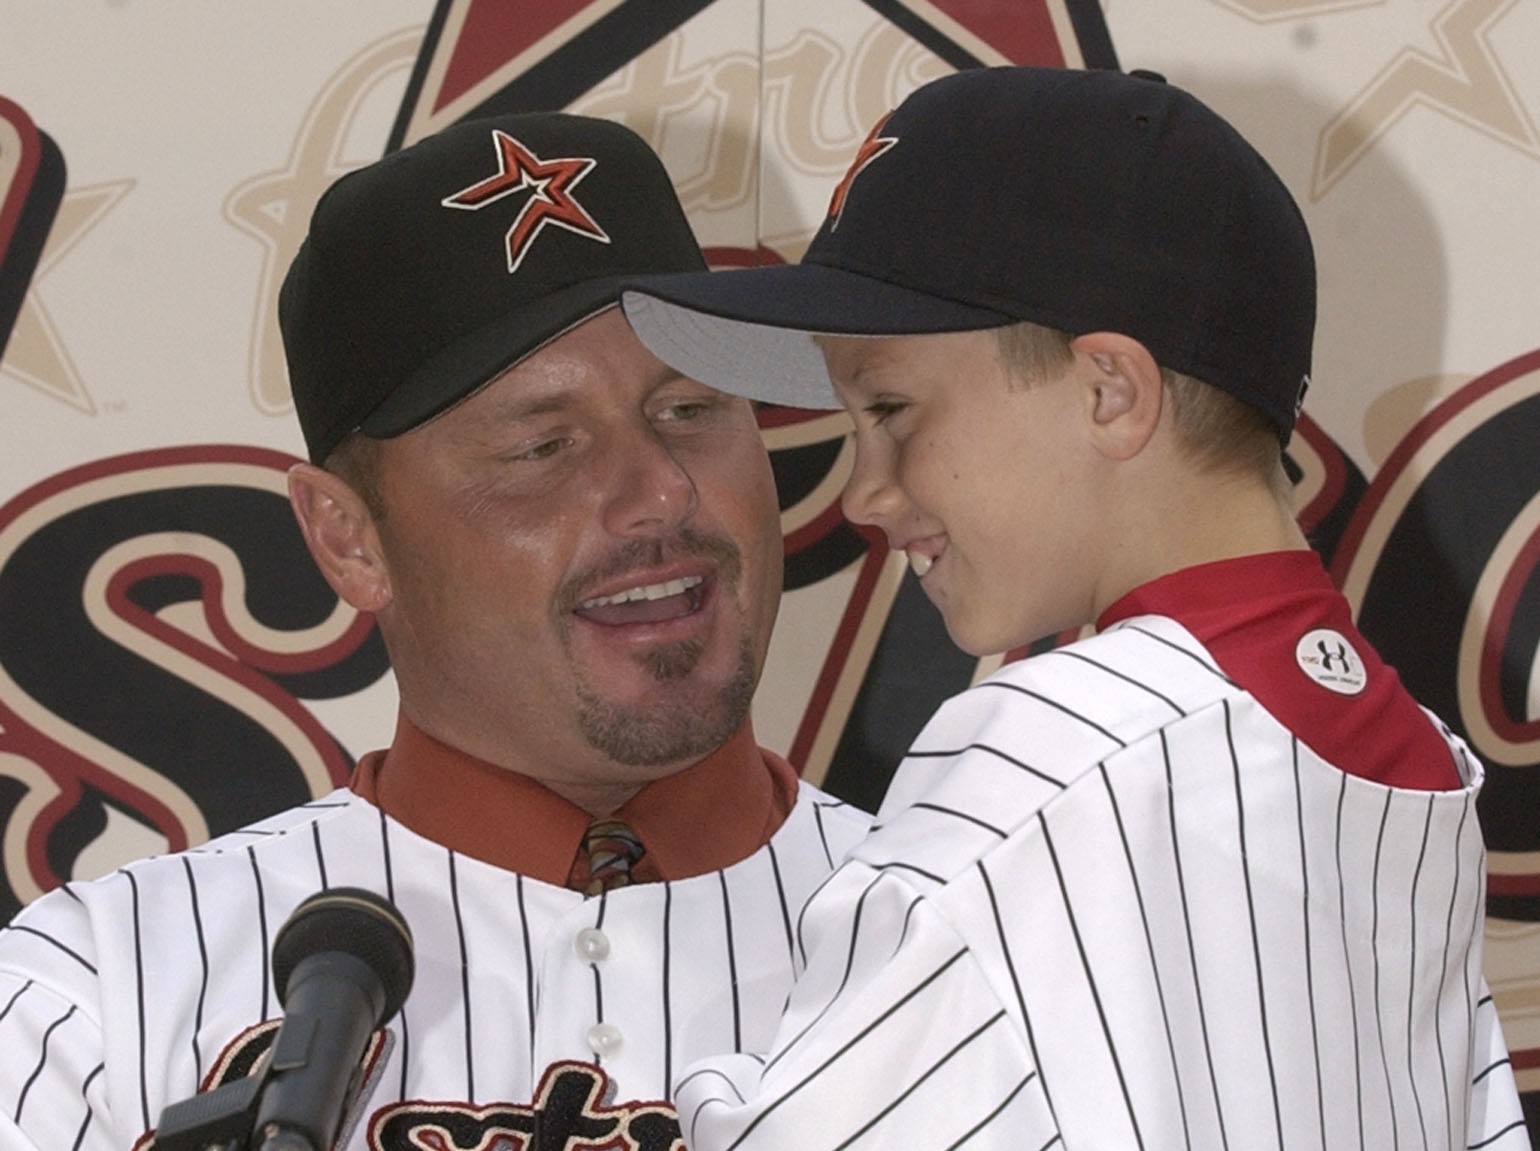 Son of Roger Clemens called up to majors by Detroit Tigers